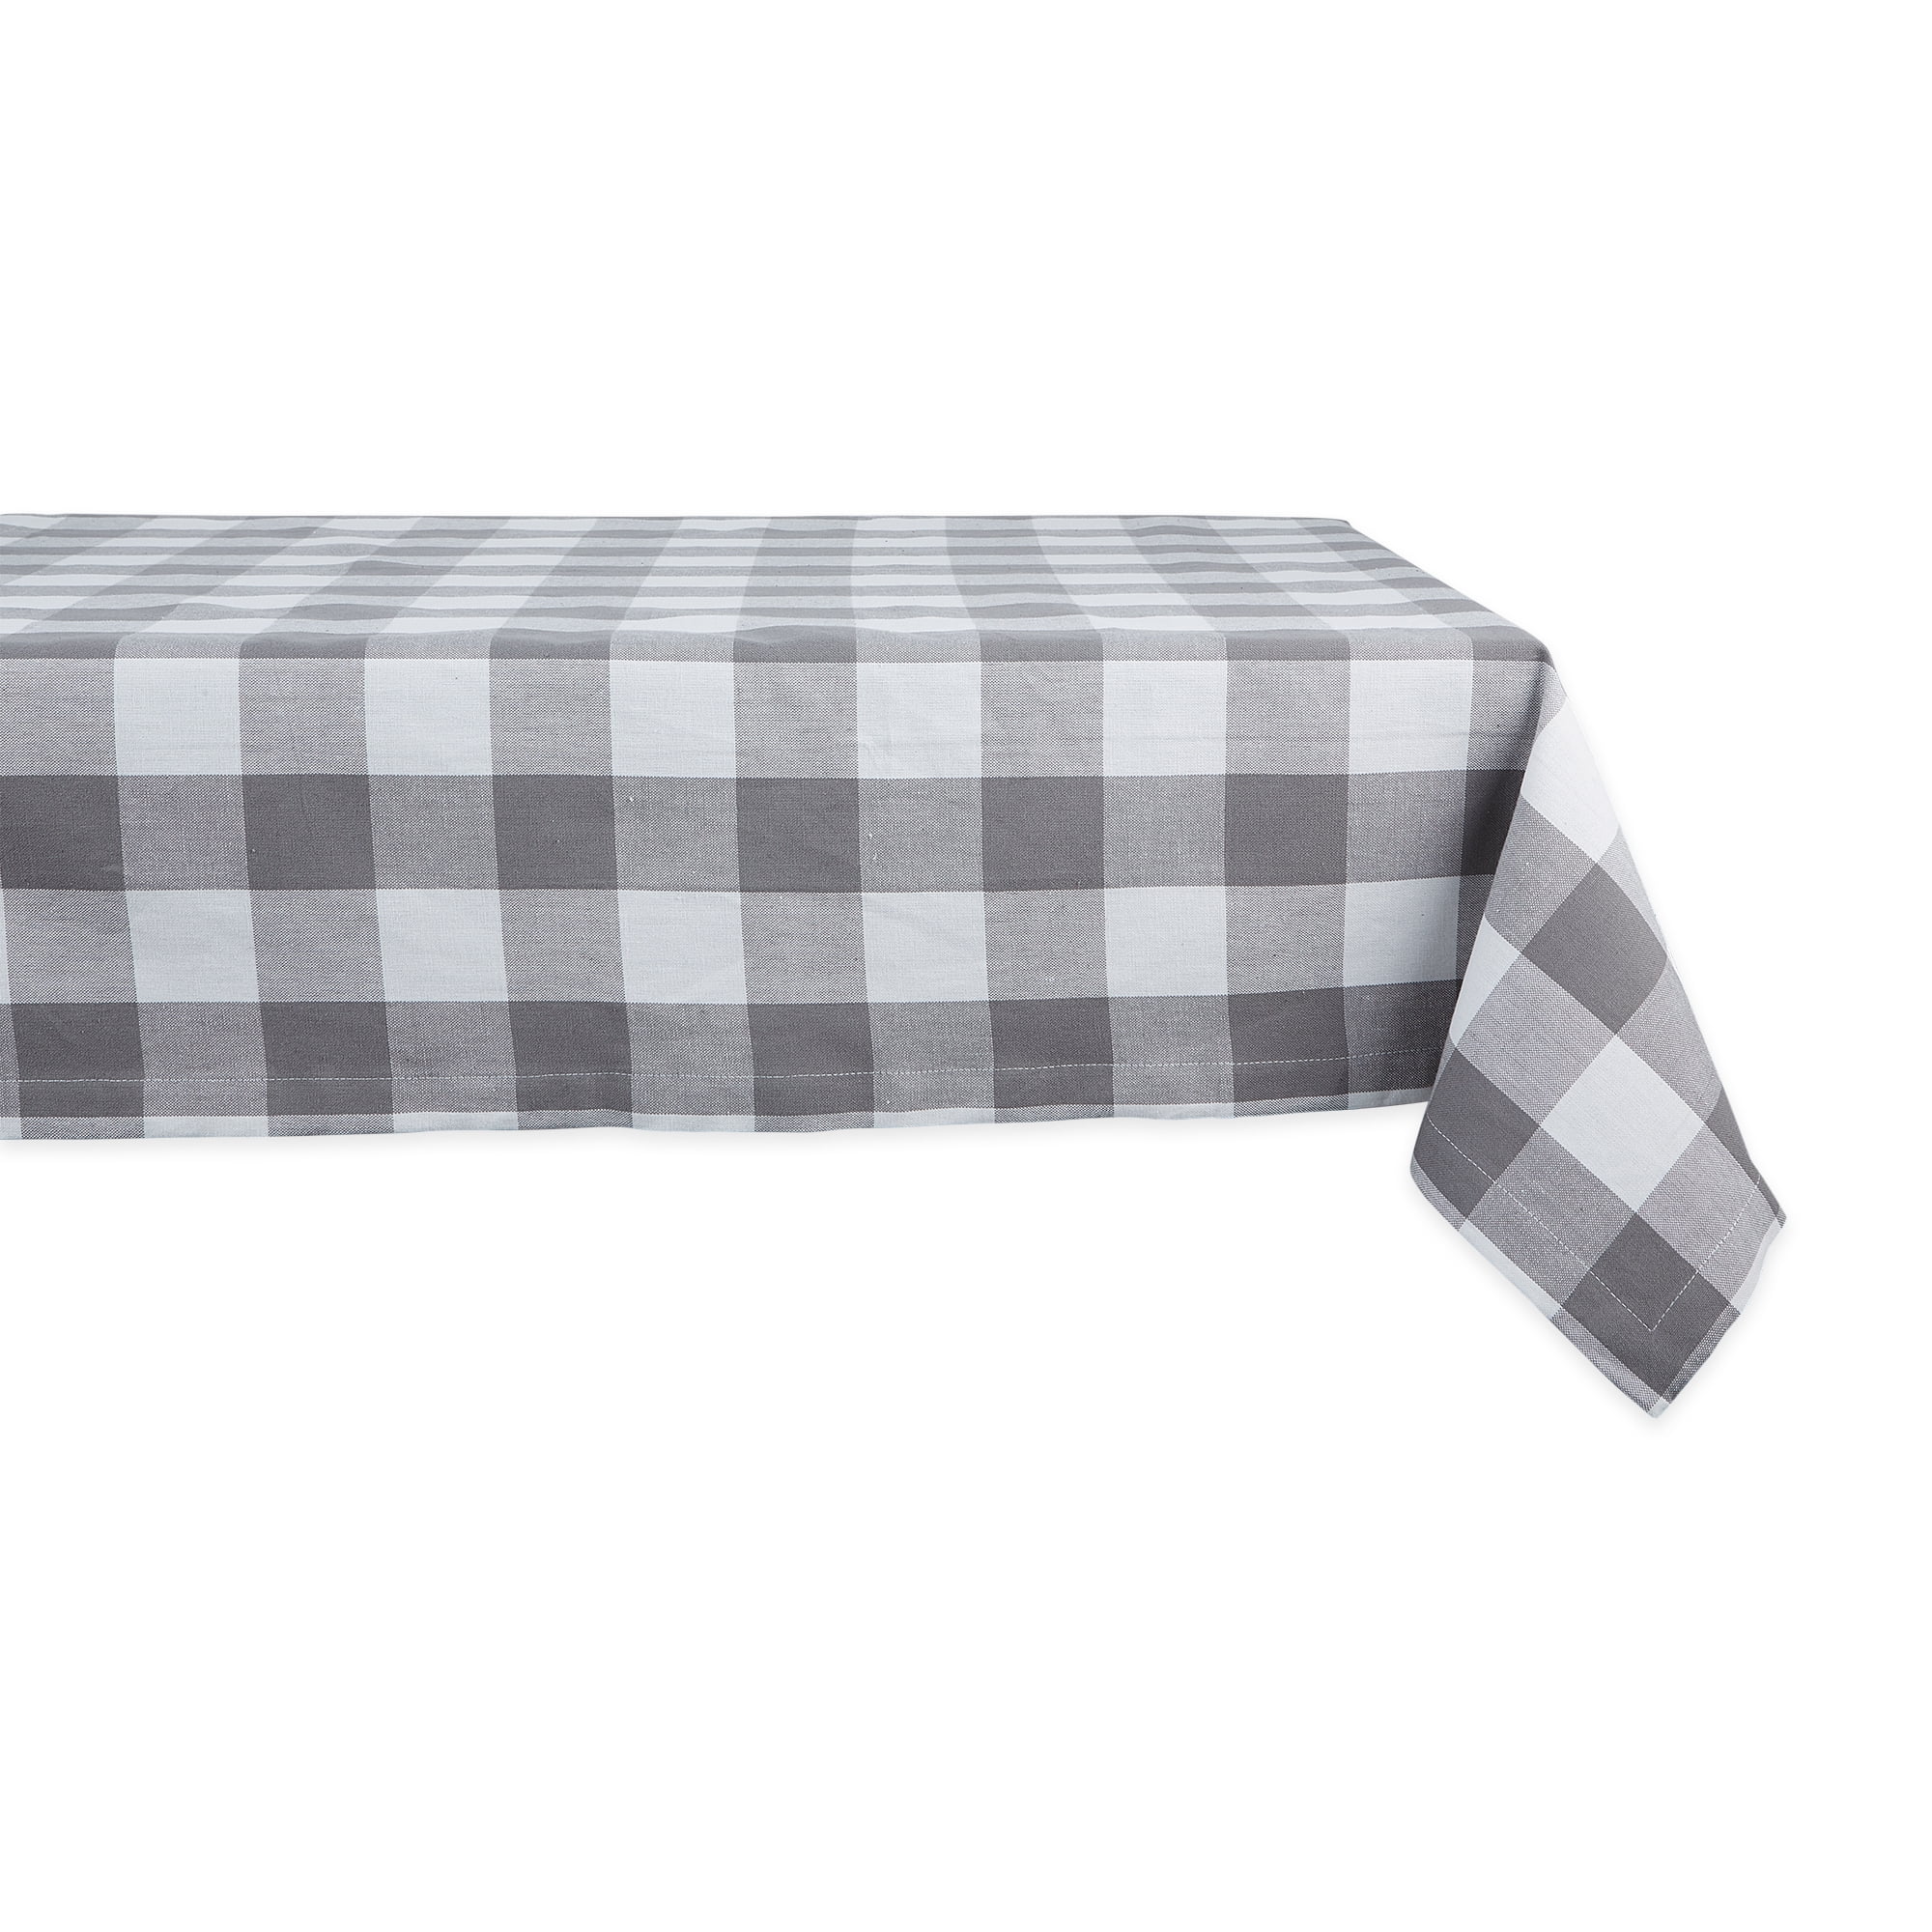 FastFood 52 x 52 in. Grey & White Buffalo Check Tablecloth